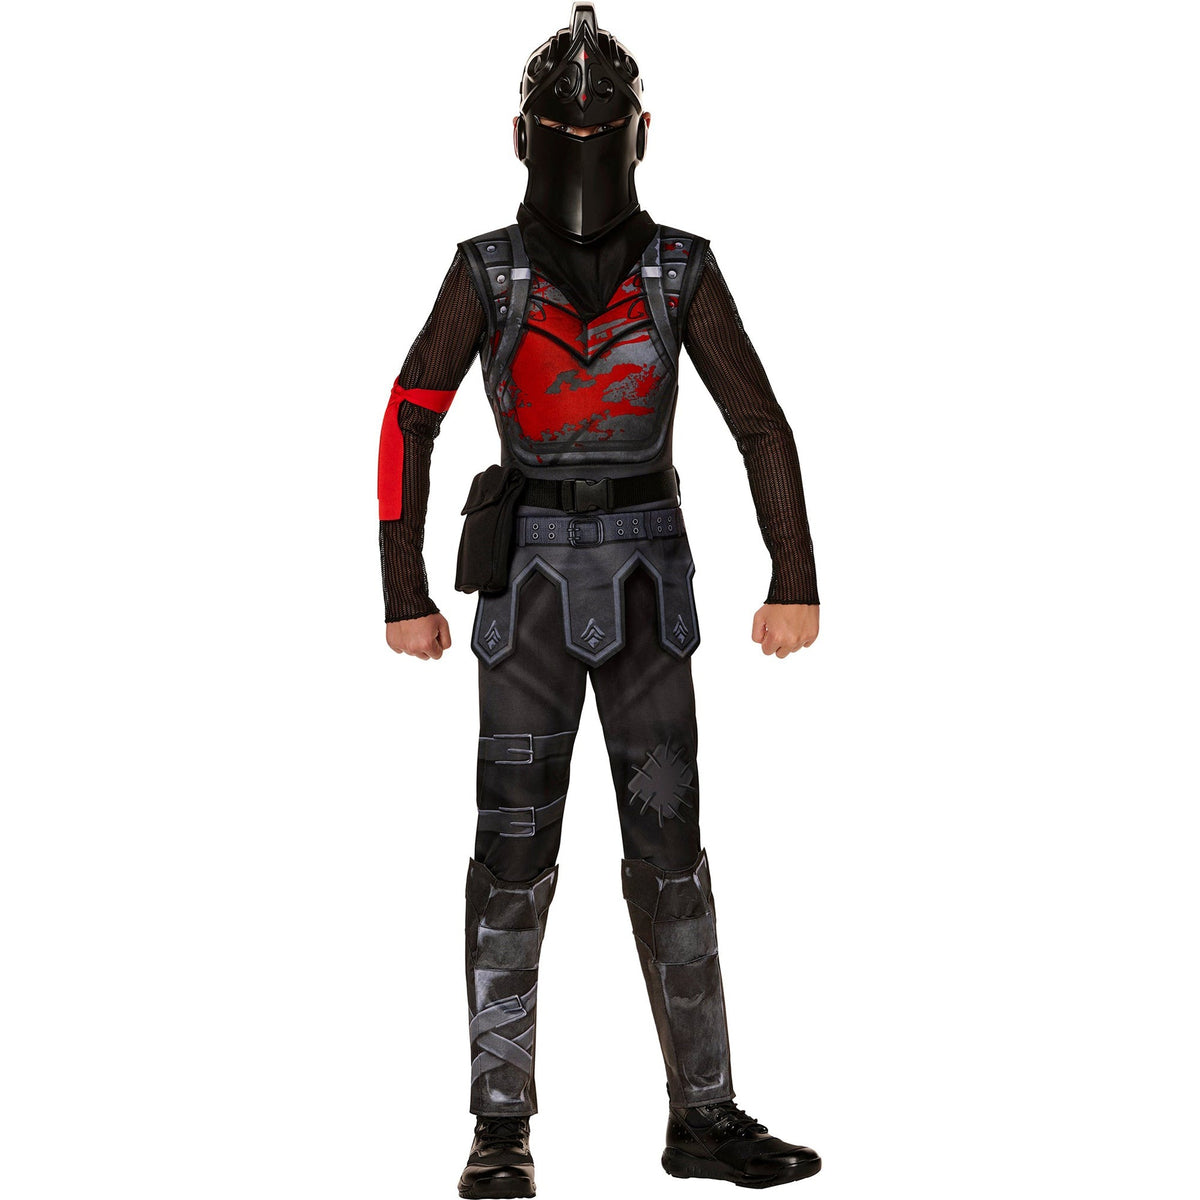 IN SPIRIT DESIGNS Costumes Black Night Costume for Kids, Fortnite, Black and Red Jumpsuit